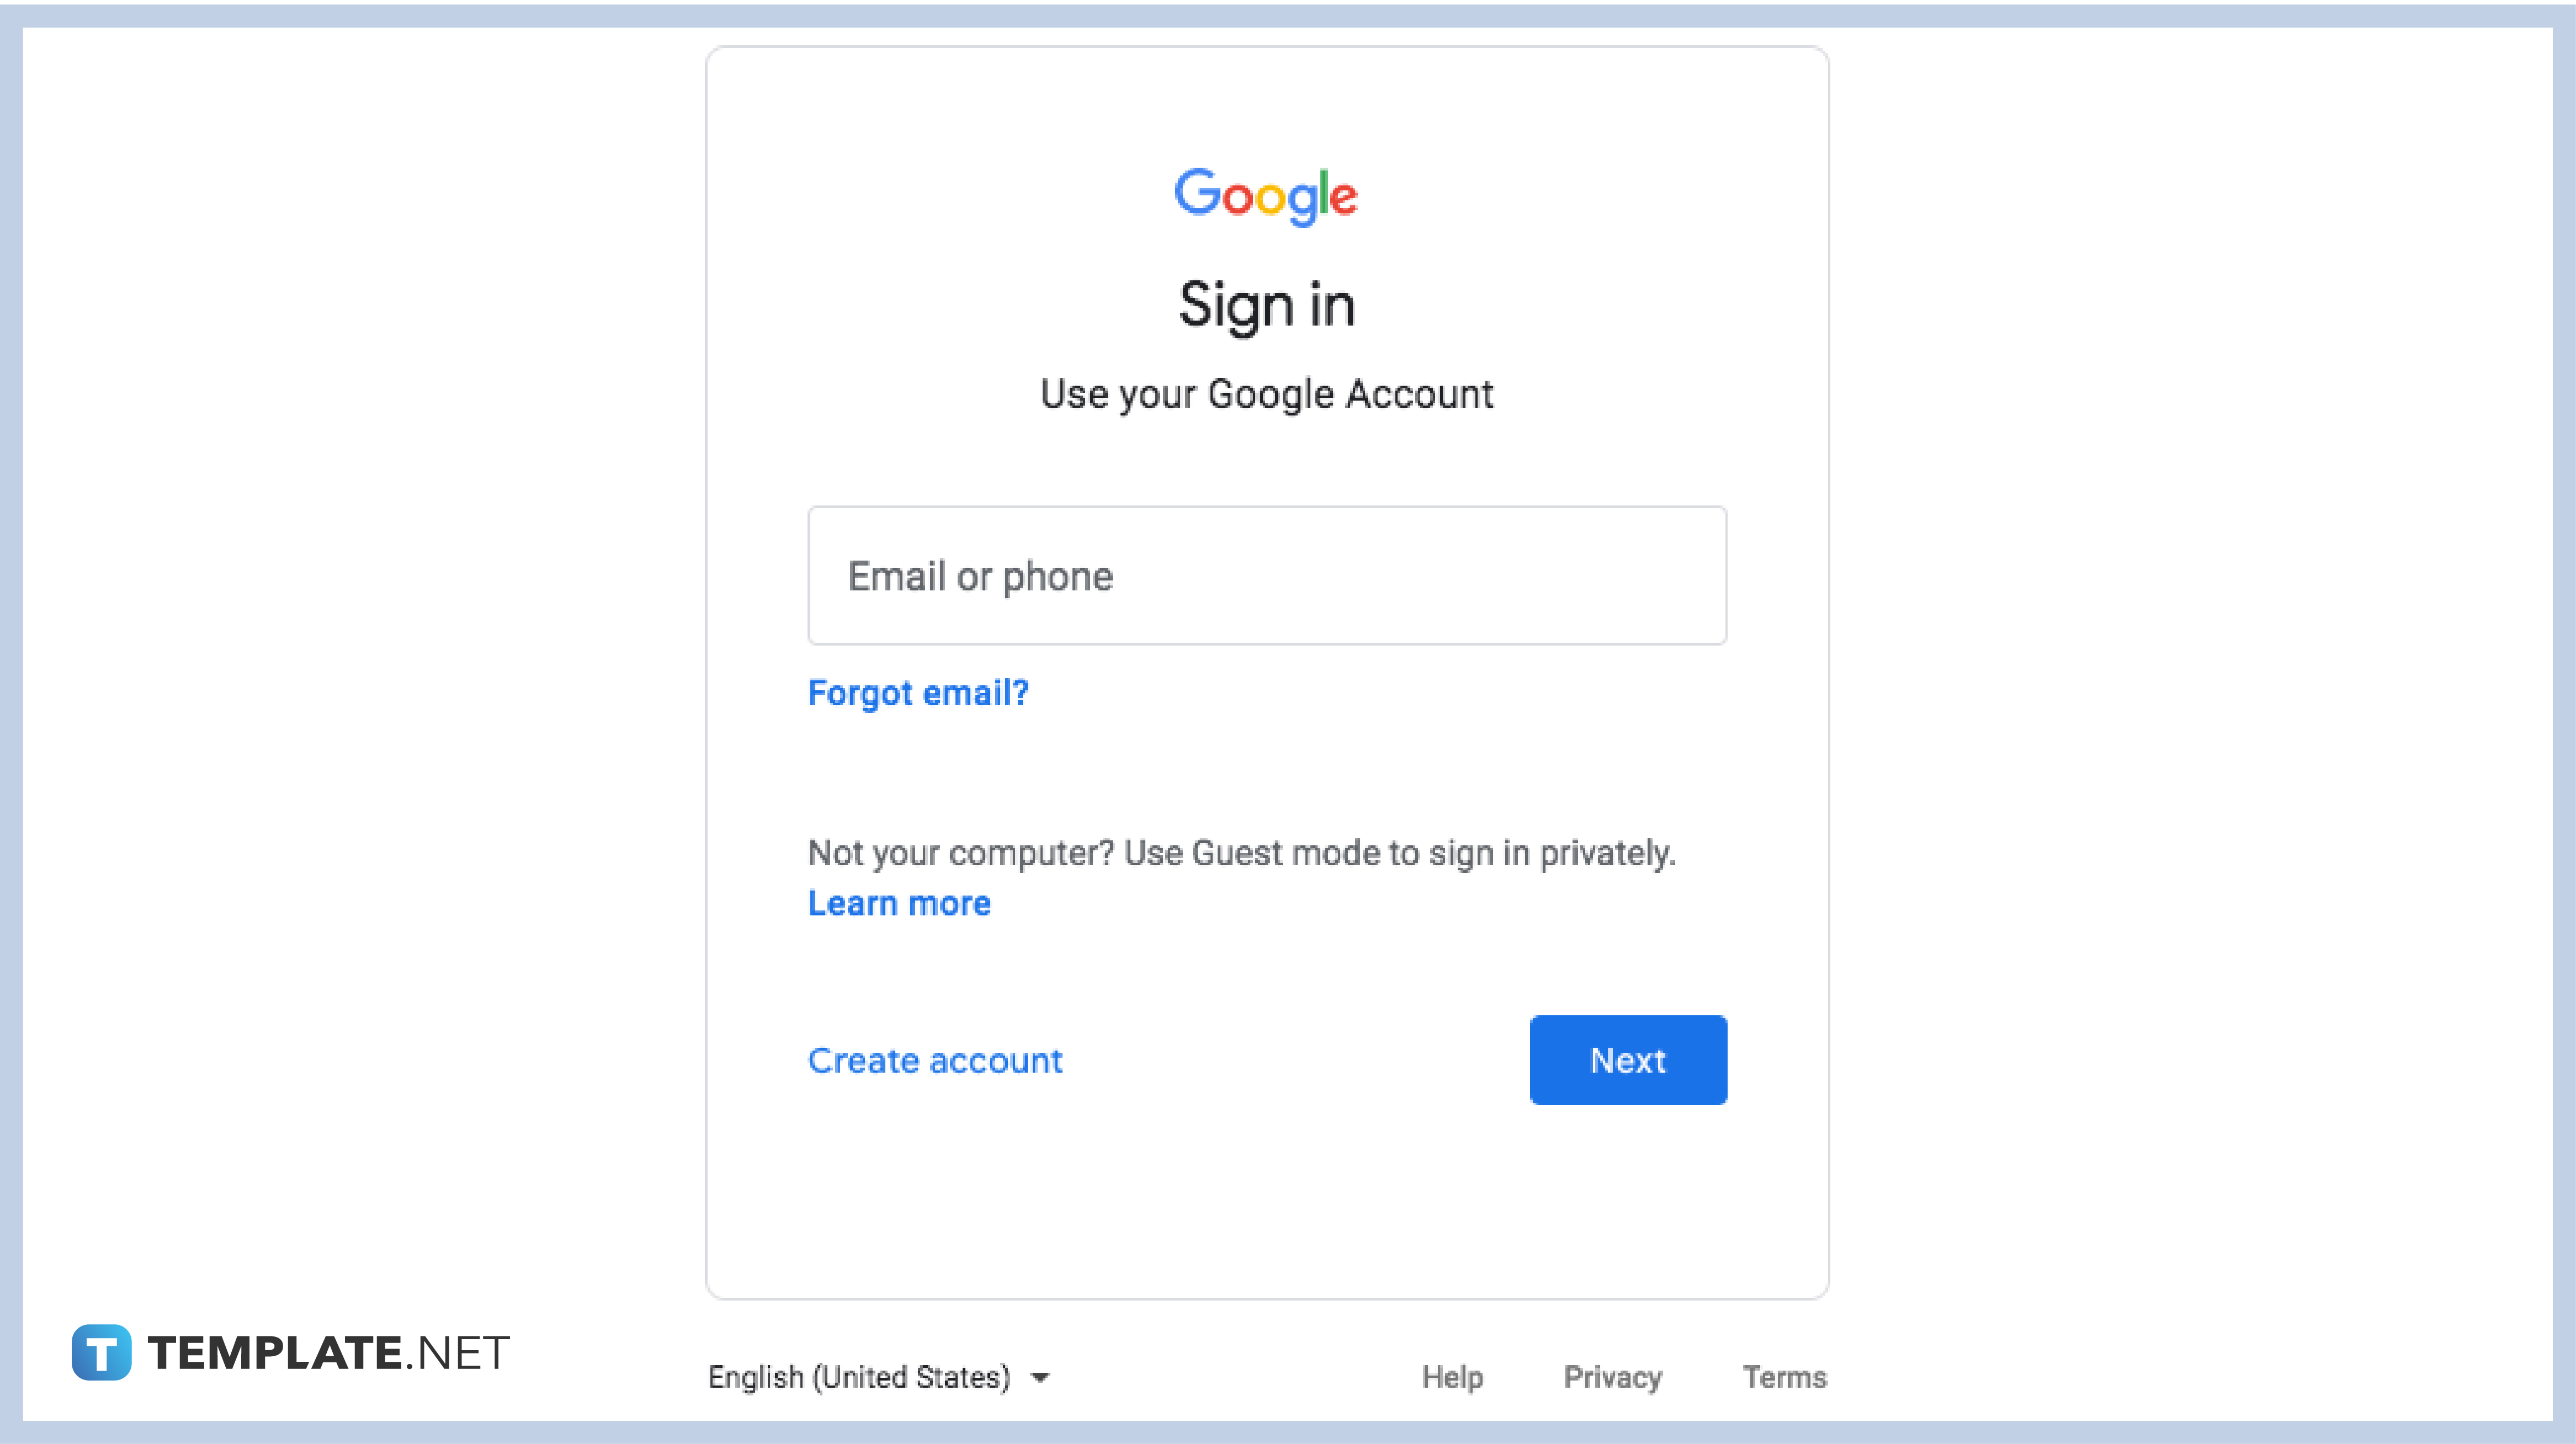 step-1-sign-in-to-your-google-account-014